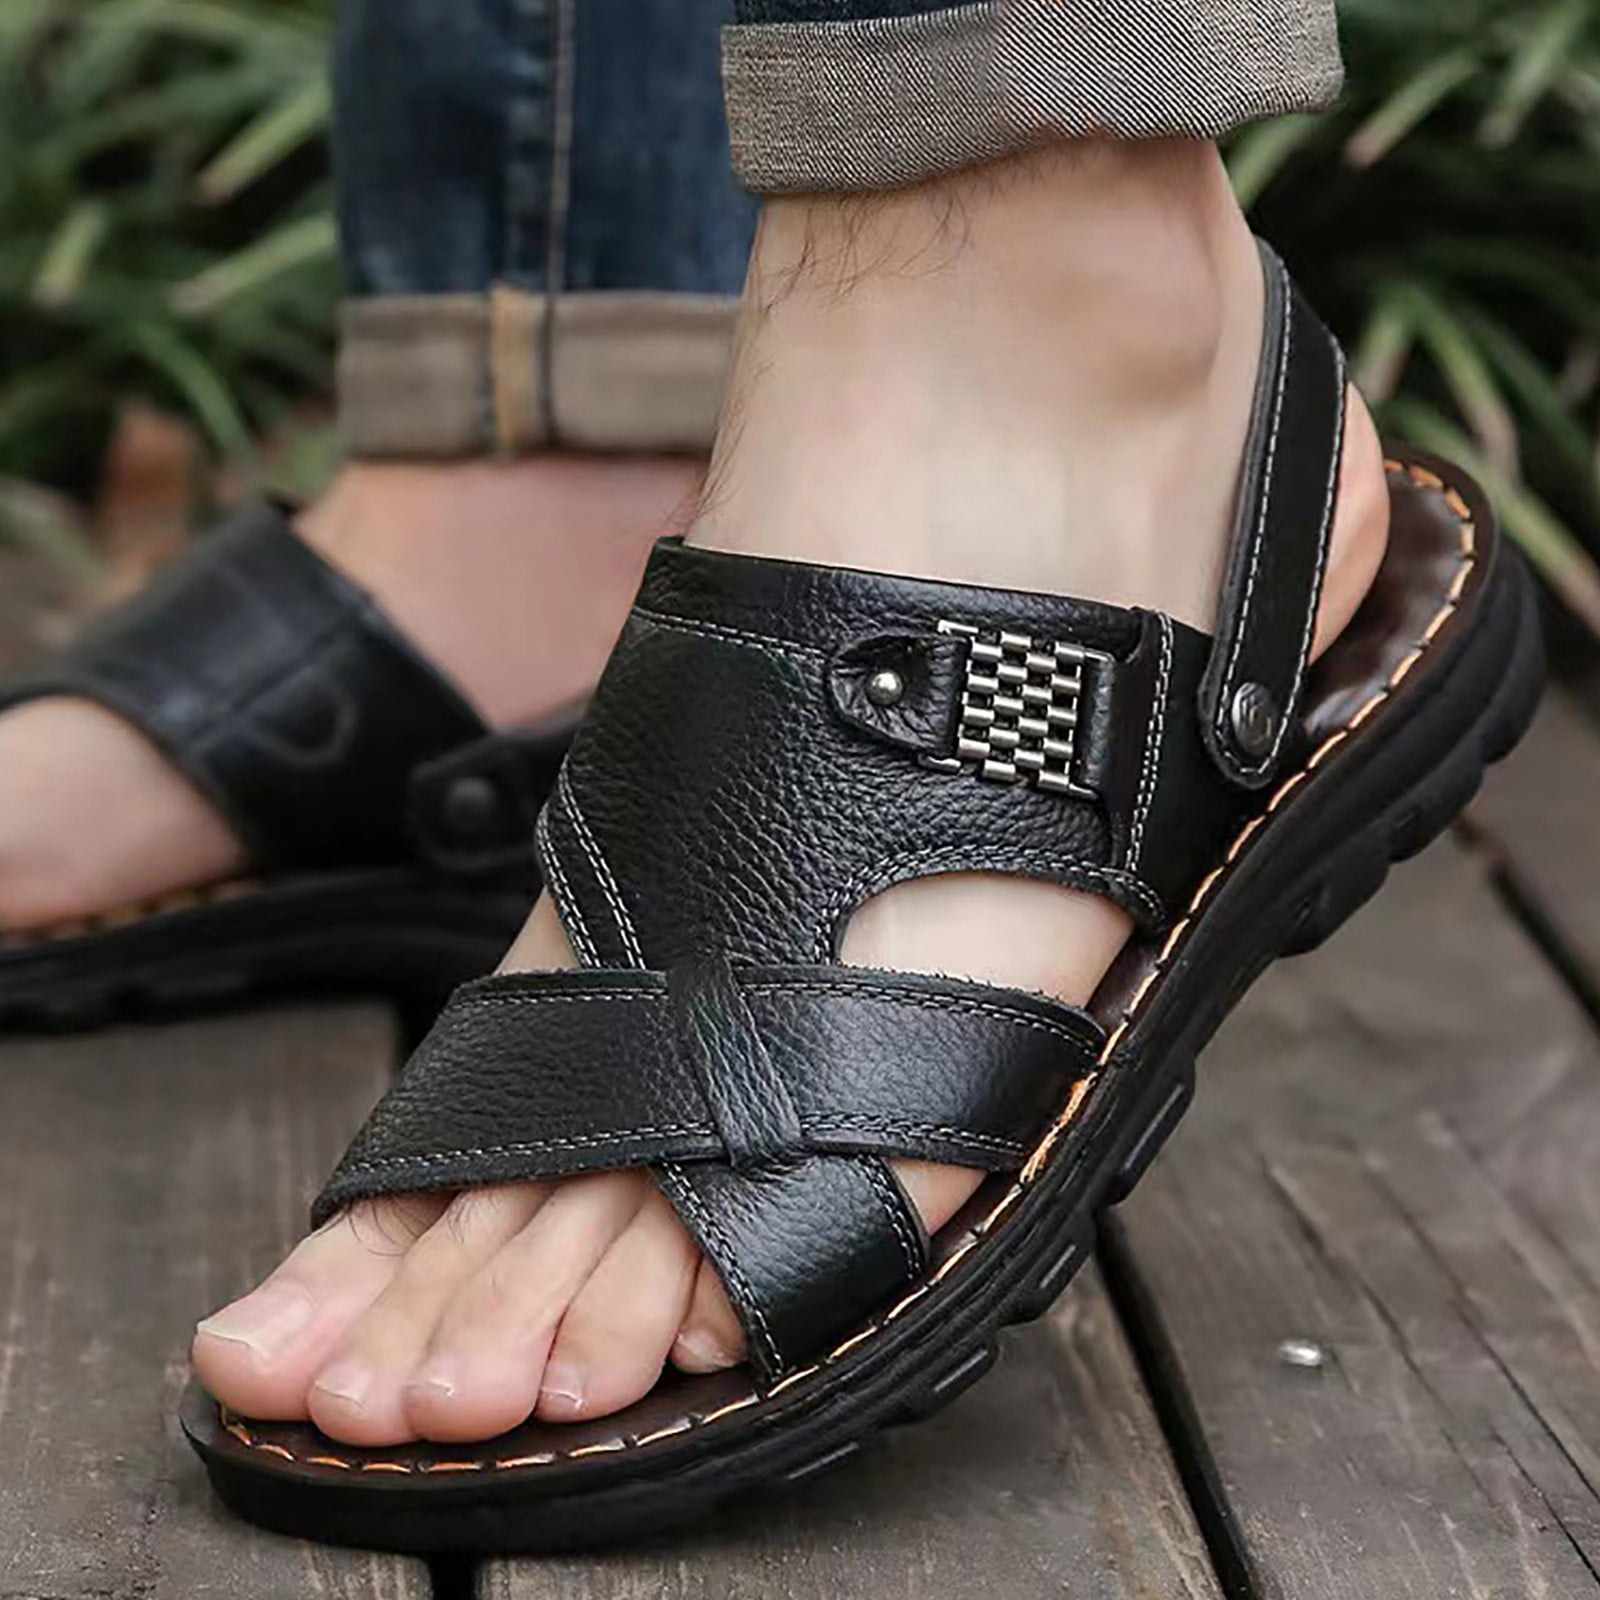 Mens Thong Sandals - Buy Thong Slippers & Sandals for Men | Mochi Shoes